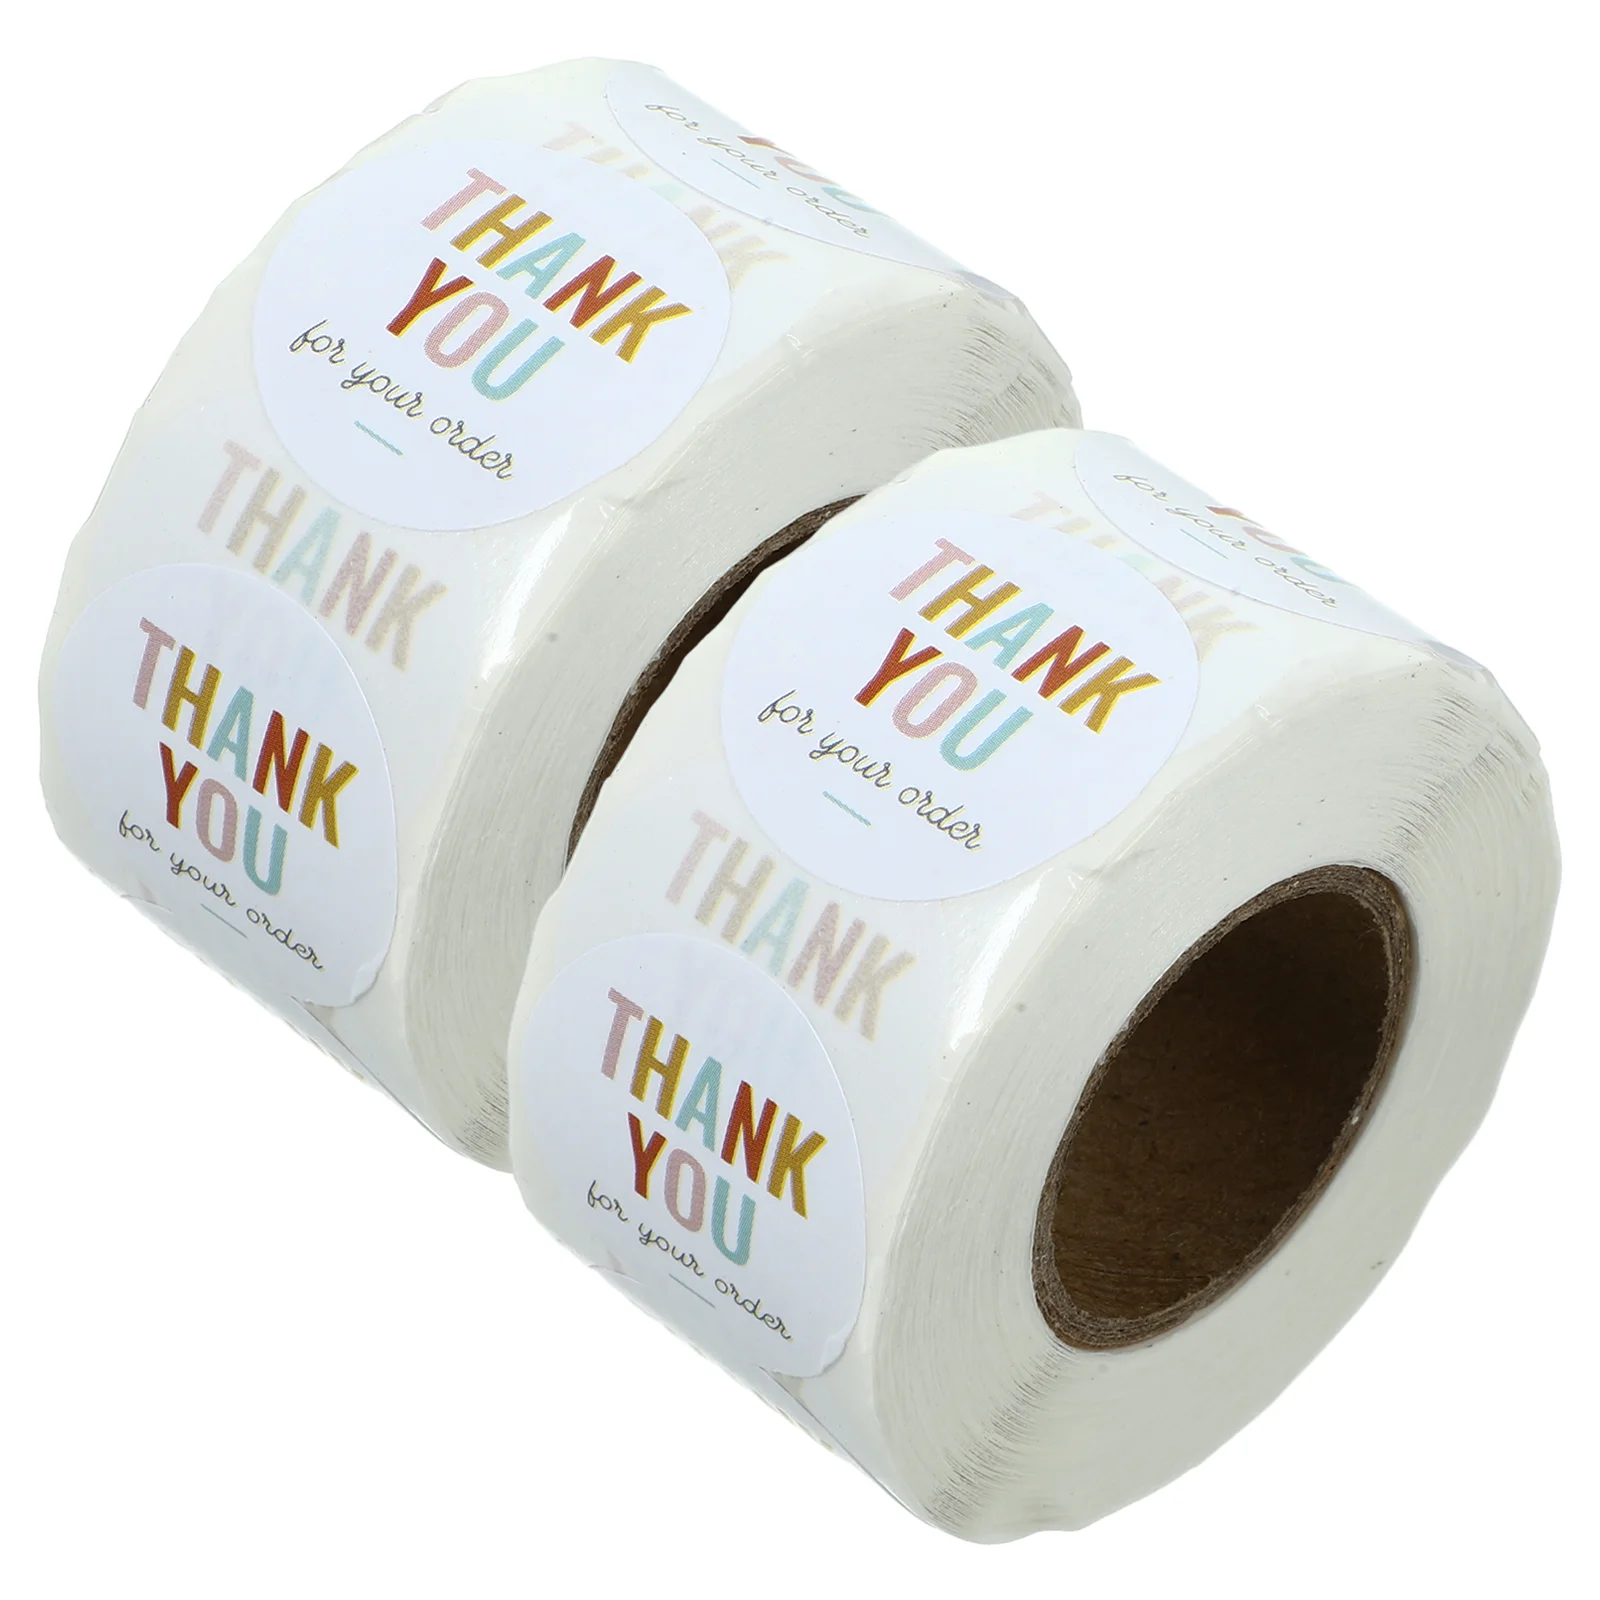 

2 Rolls Thank You Labels Self-adhesive Decal Sealing Sticker Gift Wrap Stickers Bag Wrapping